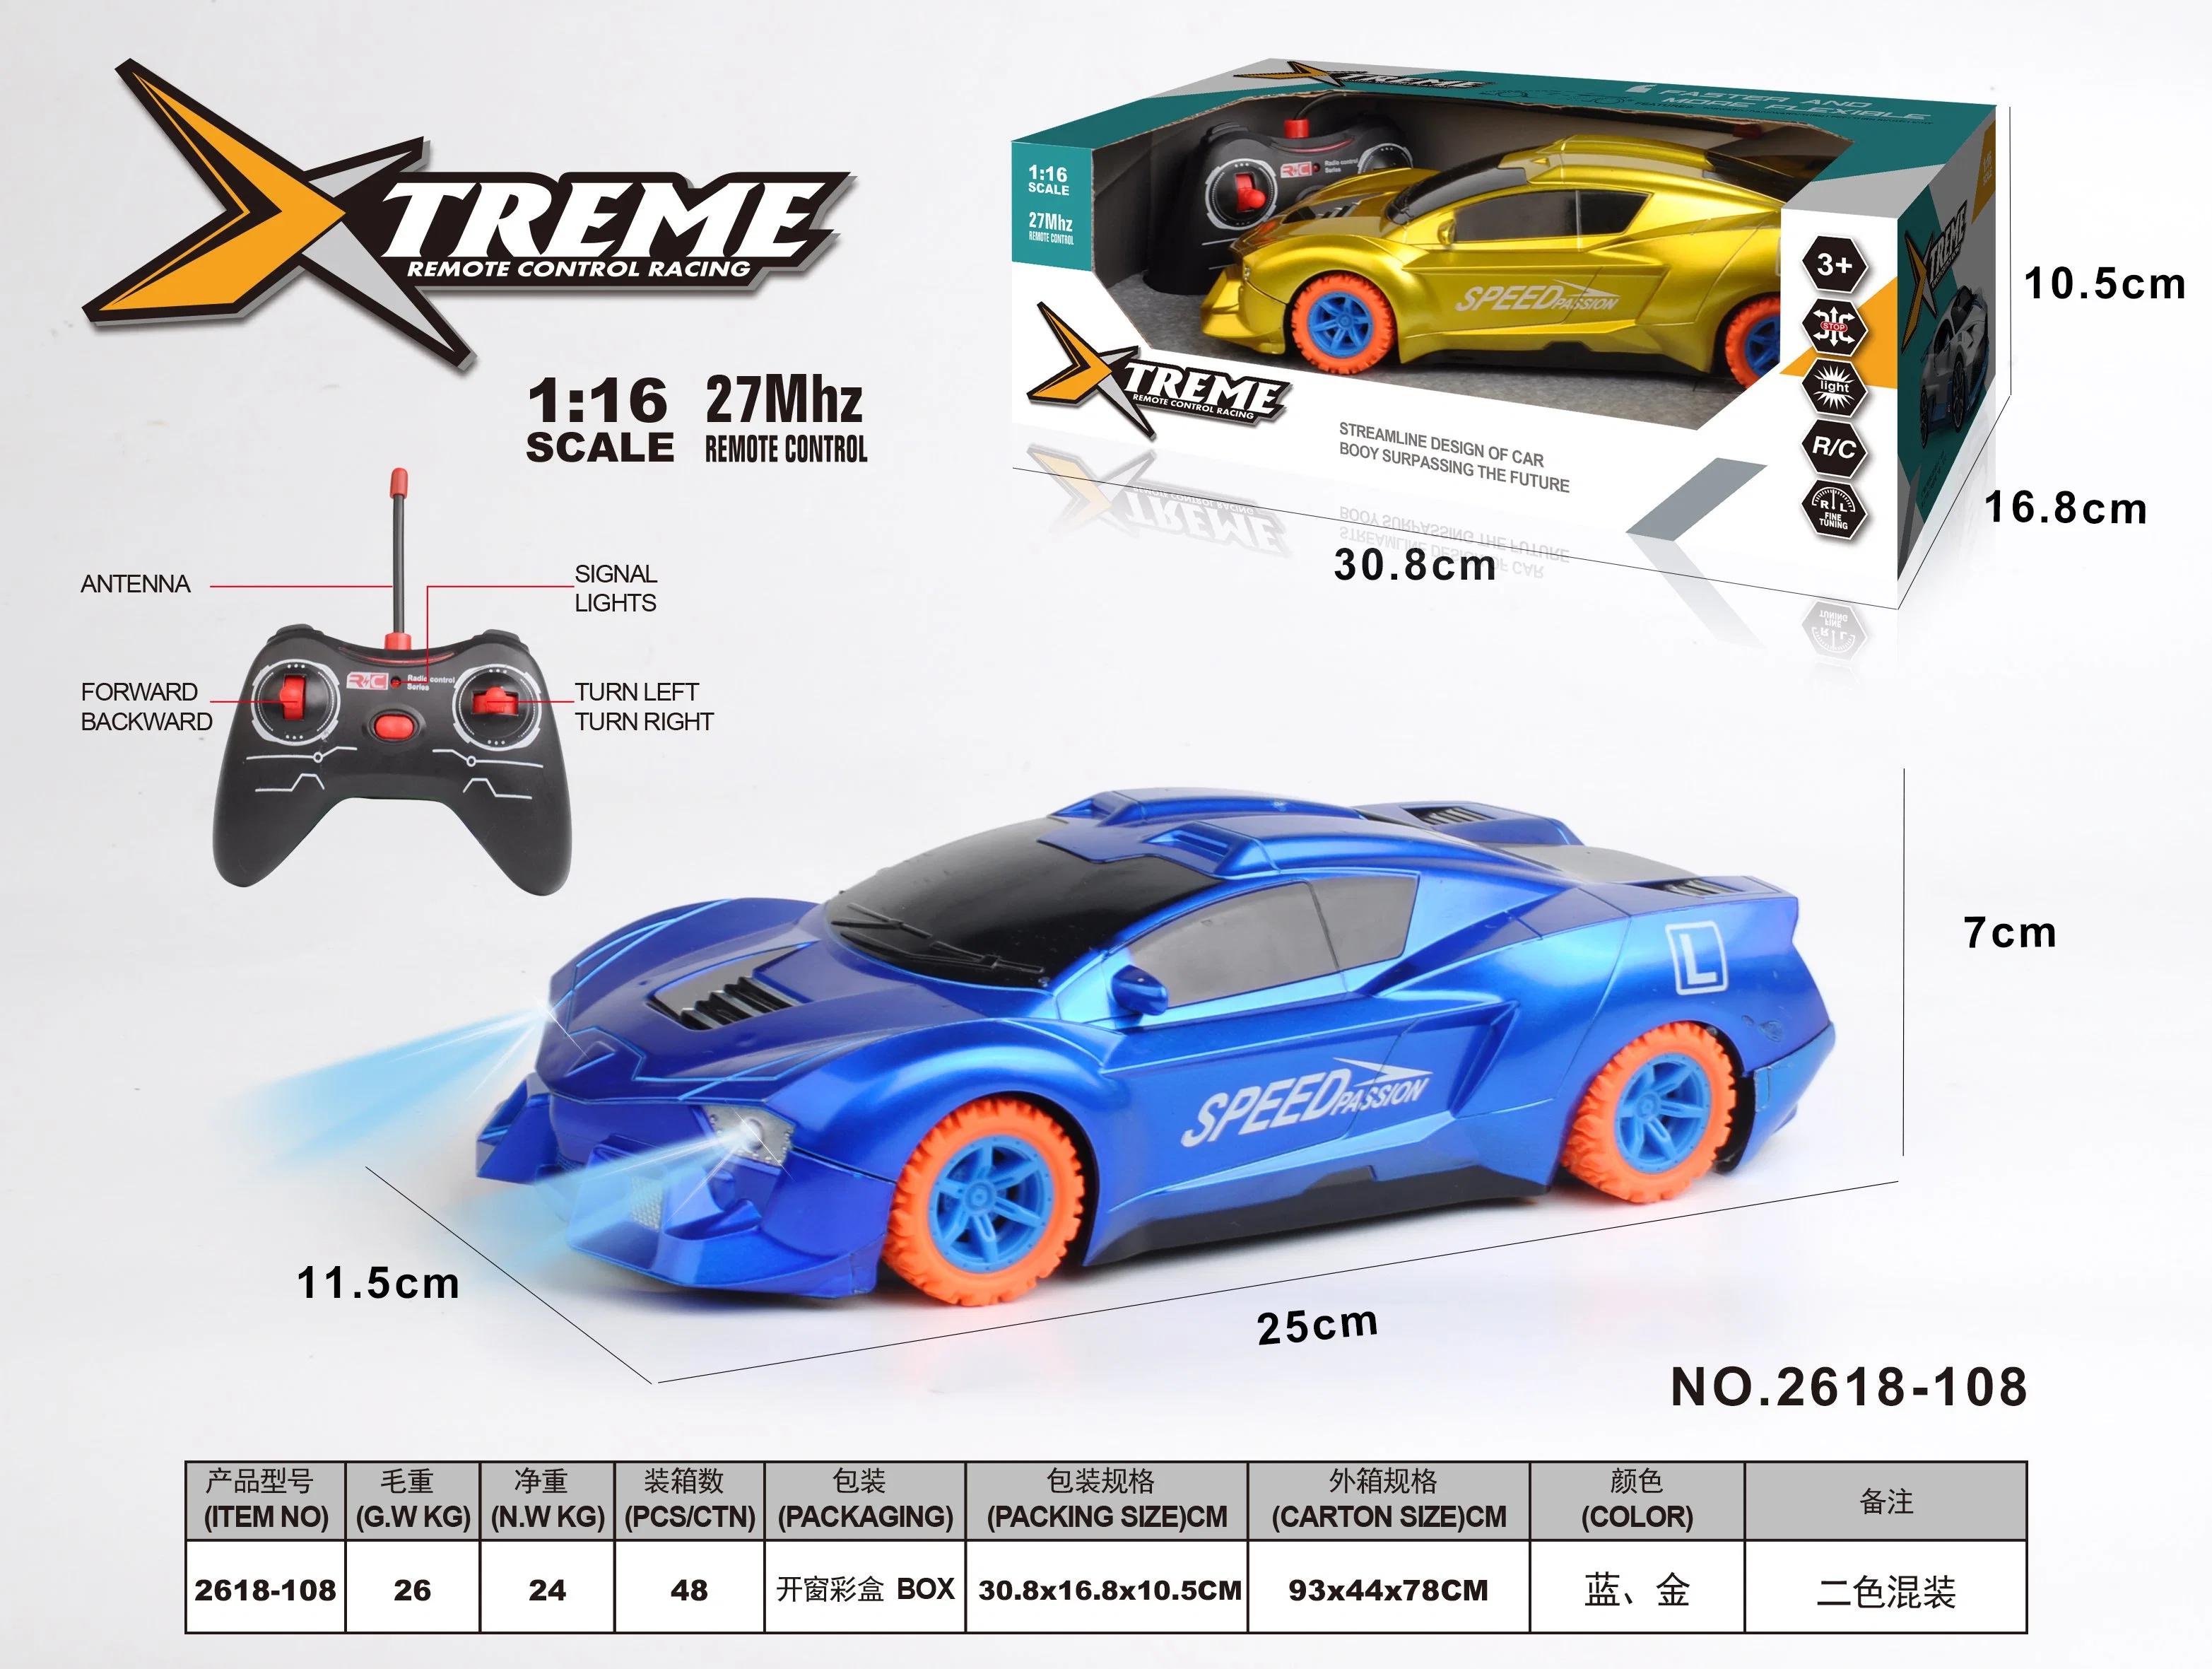 Remote Control Car Shopee: Top brand products available at Remote Control Car Shopee.